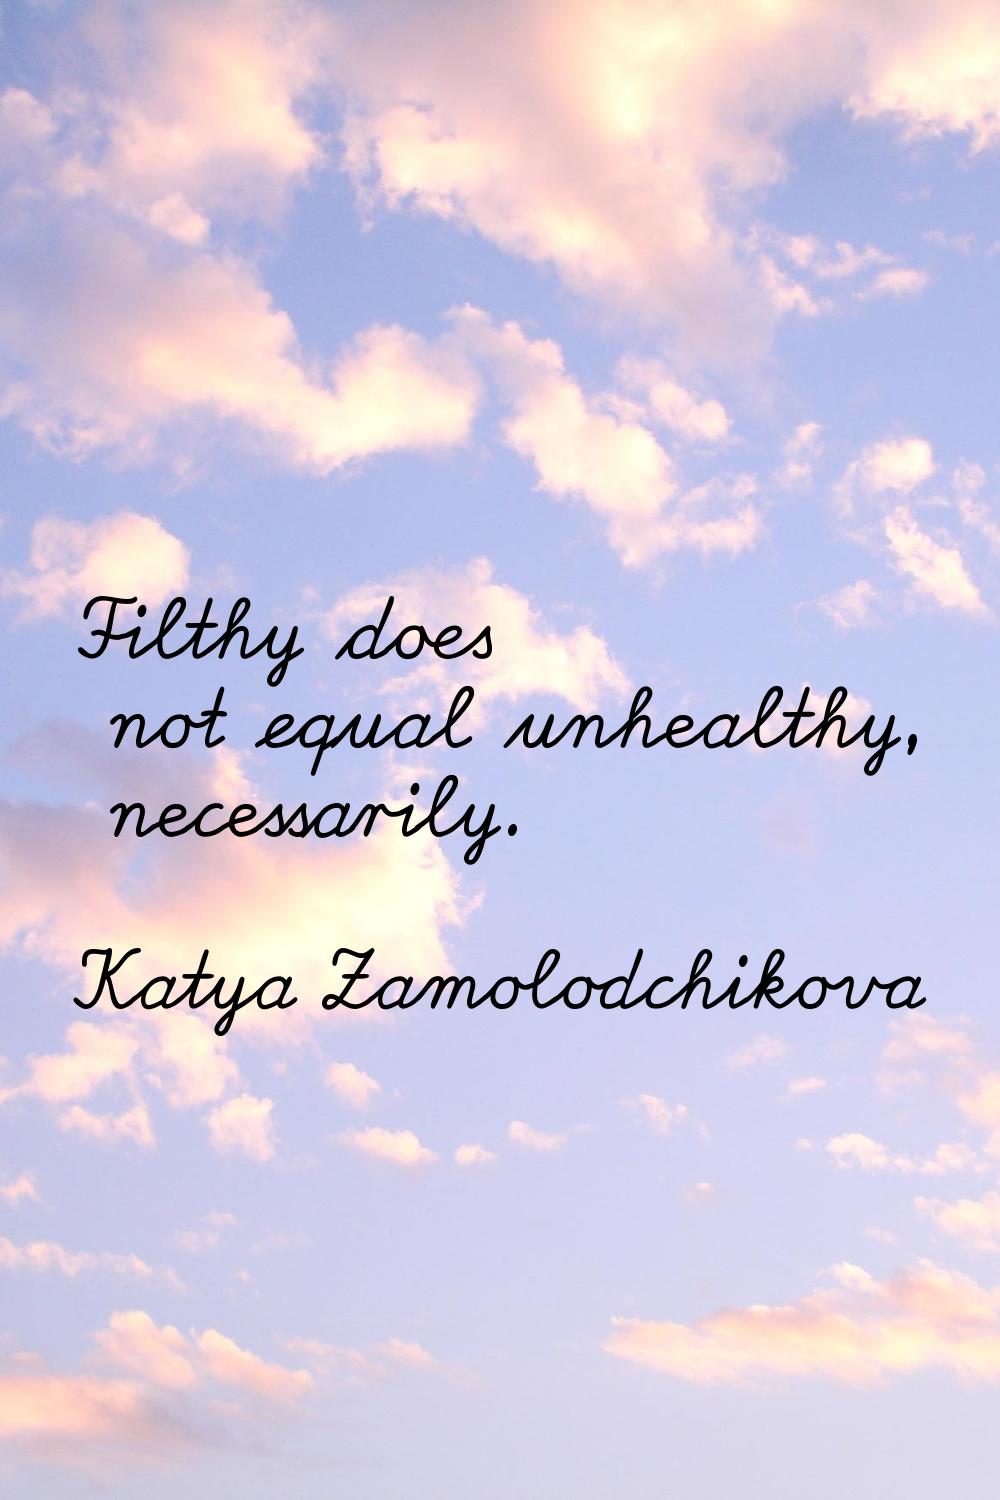 Filthy does not equal unhealthy, necessarily.